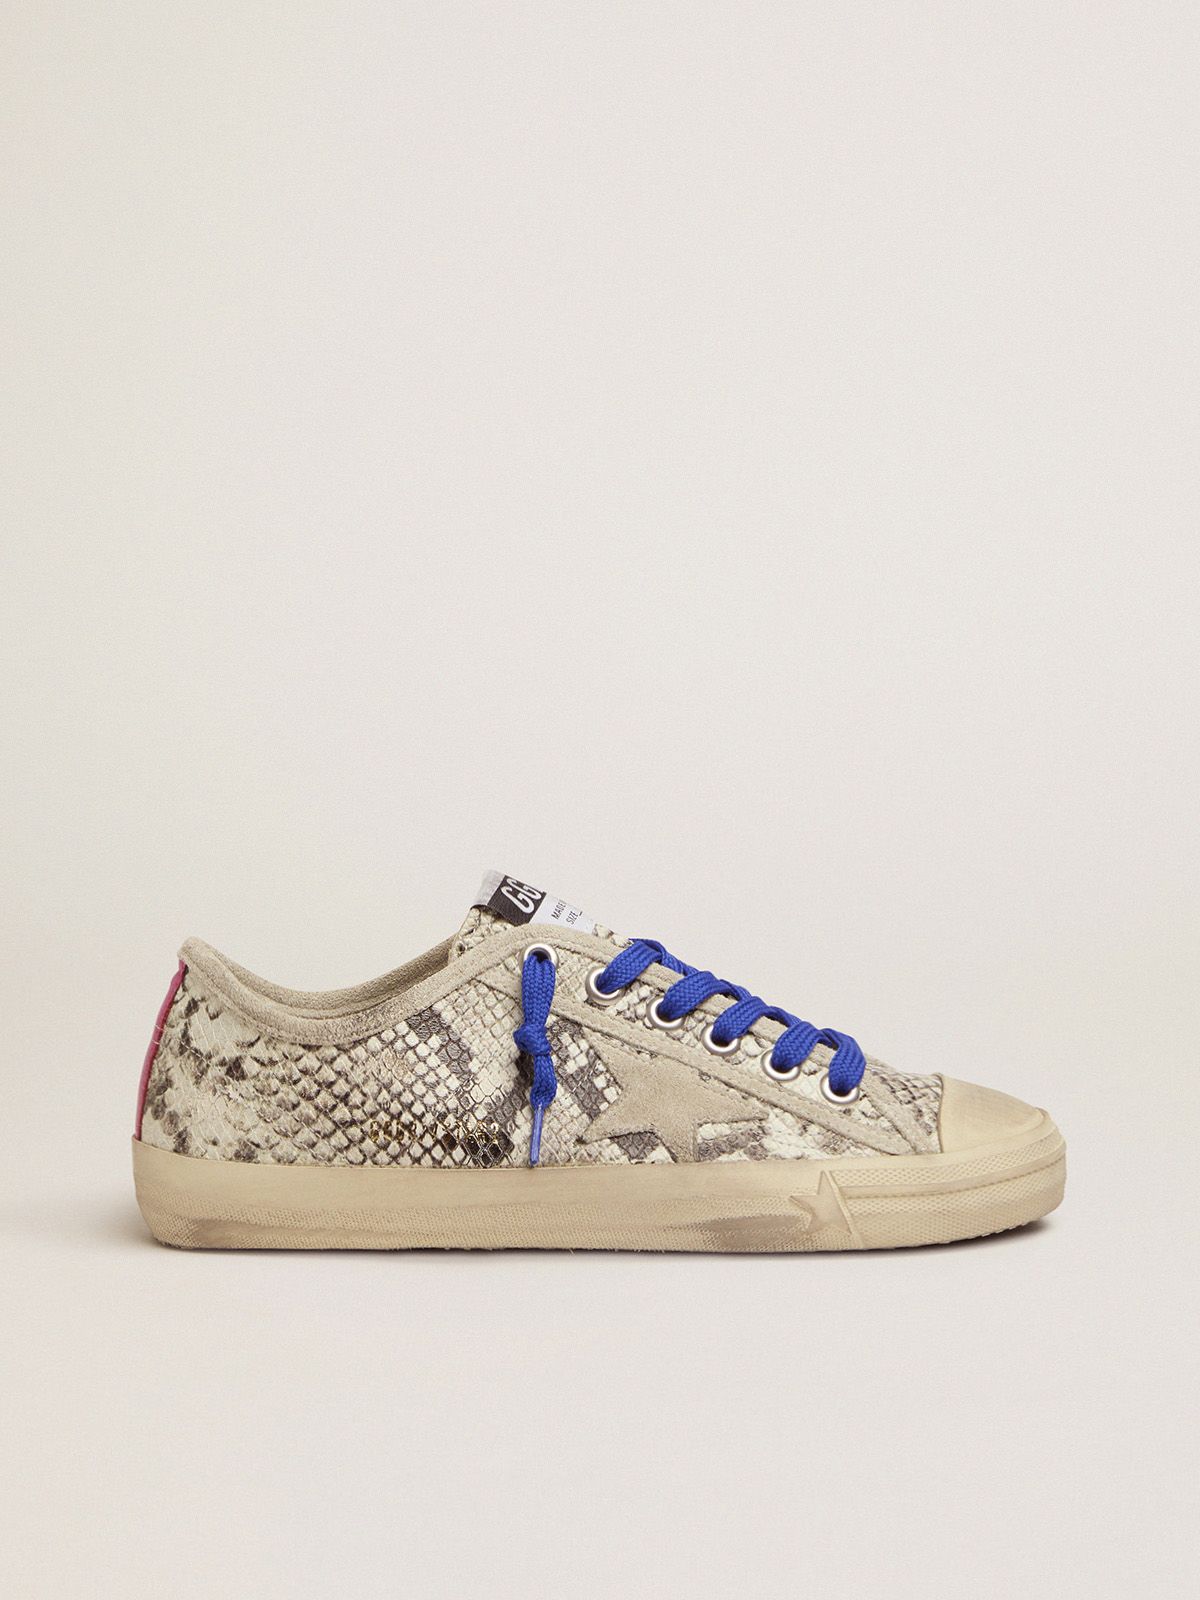 golden goose fuchsia snake-print with leather V-Star sneakers insert in